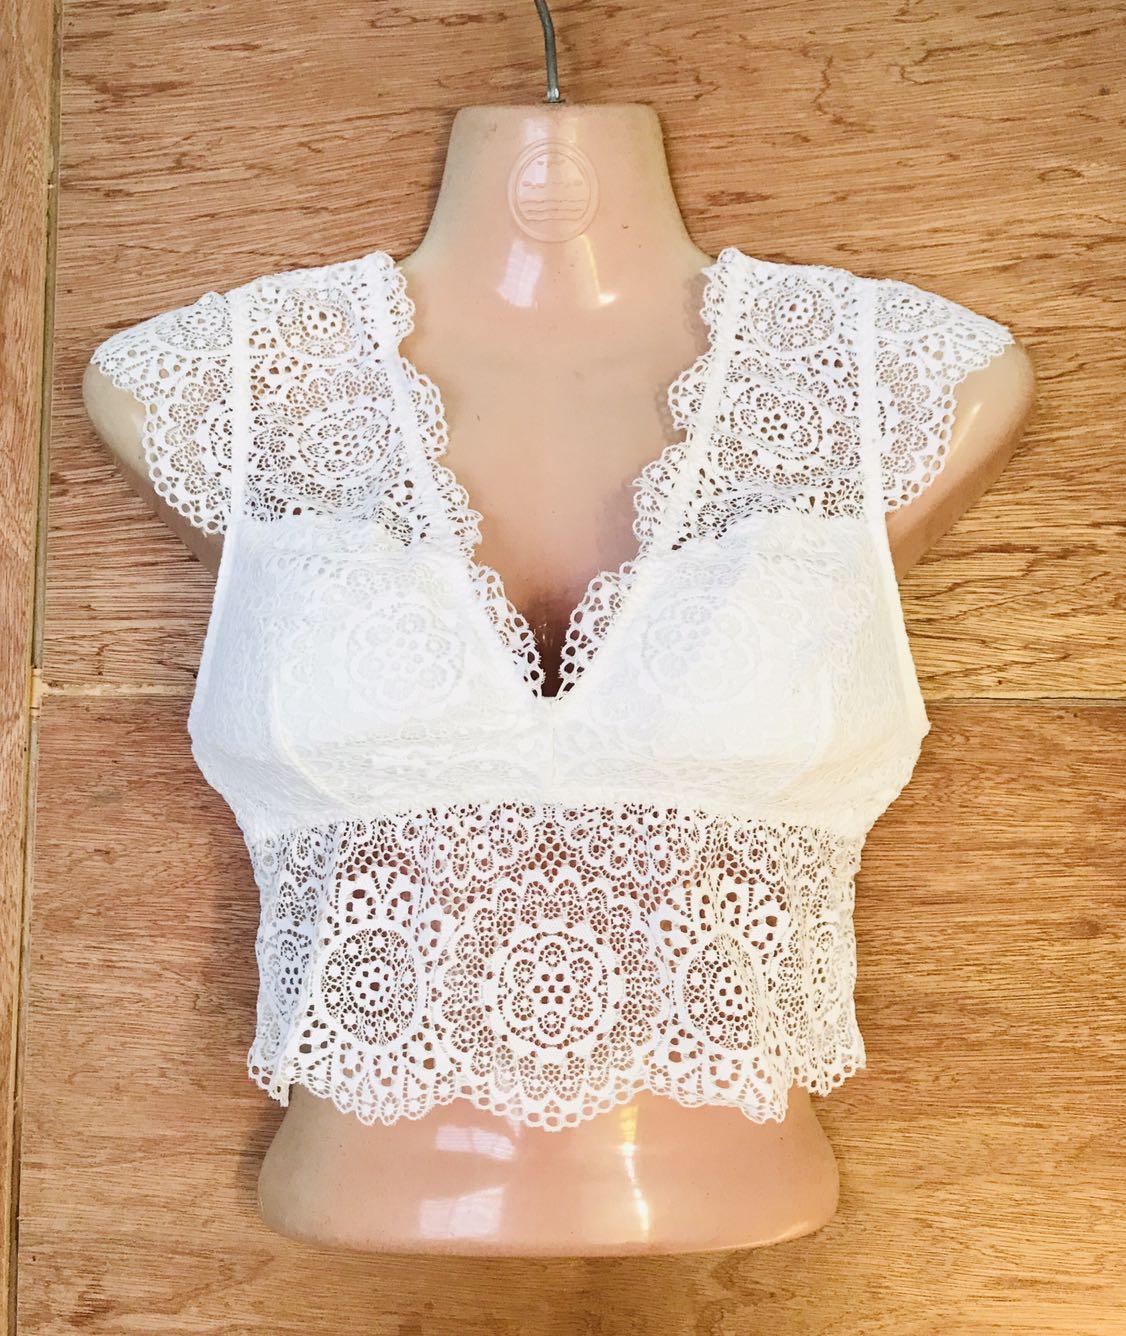 Hollister Gilly Hicks geo lace cap sleeve bralette in white Small